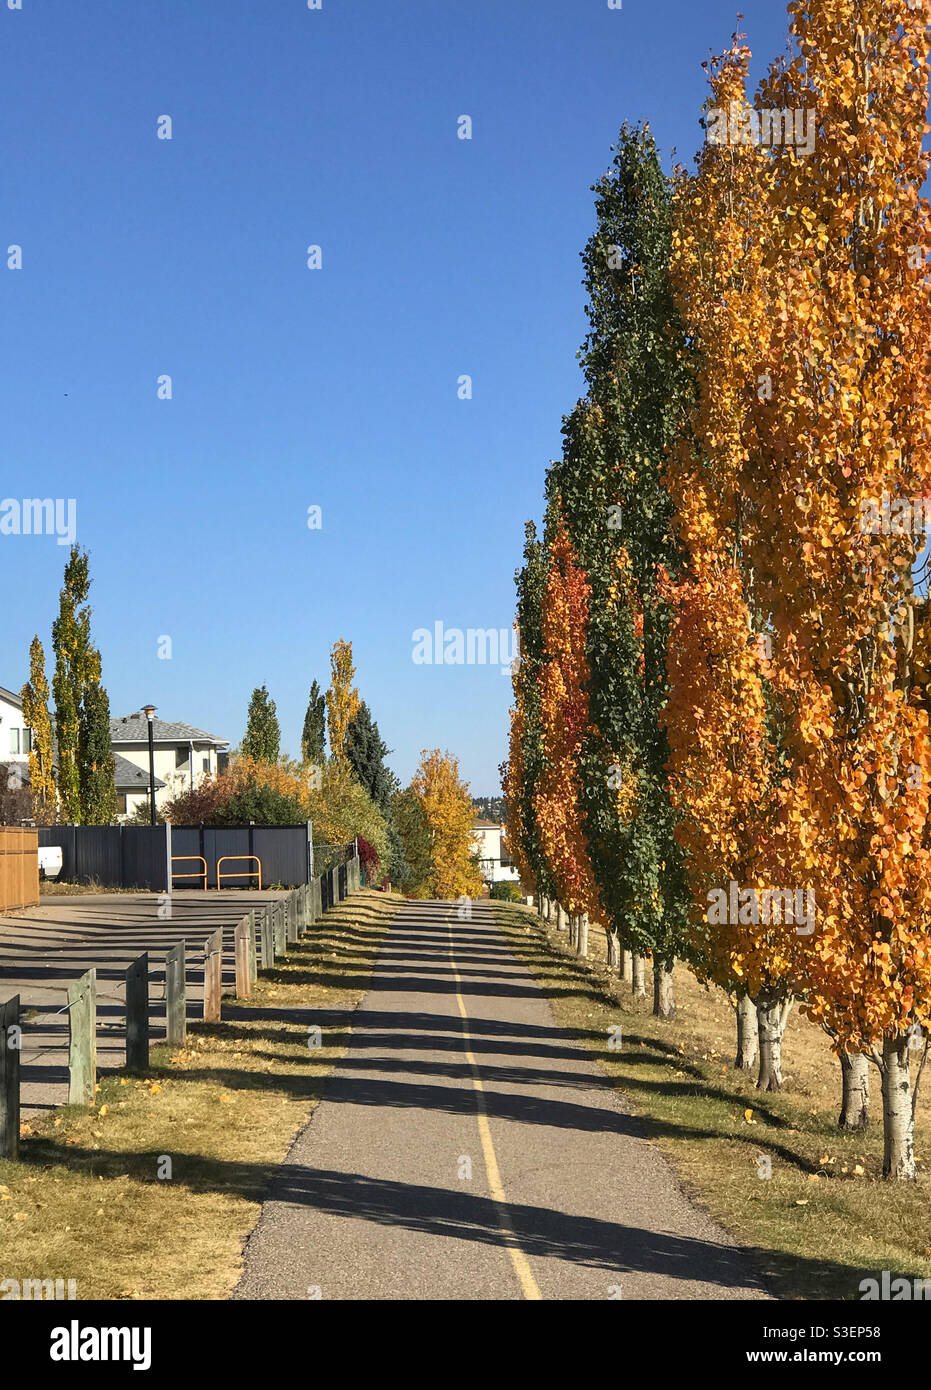 Autumnal poplar trees in their fall colours, casting shadow stripes across a pathway. Calgary, Alberta, Canada. Stock Photo